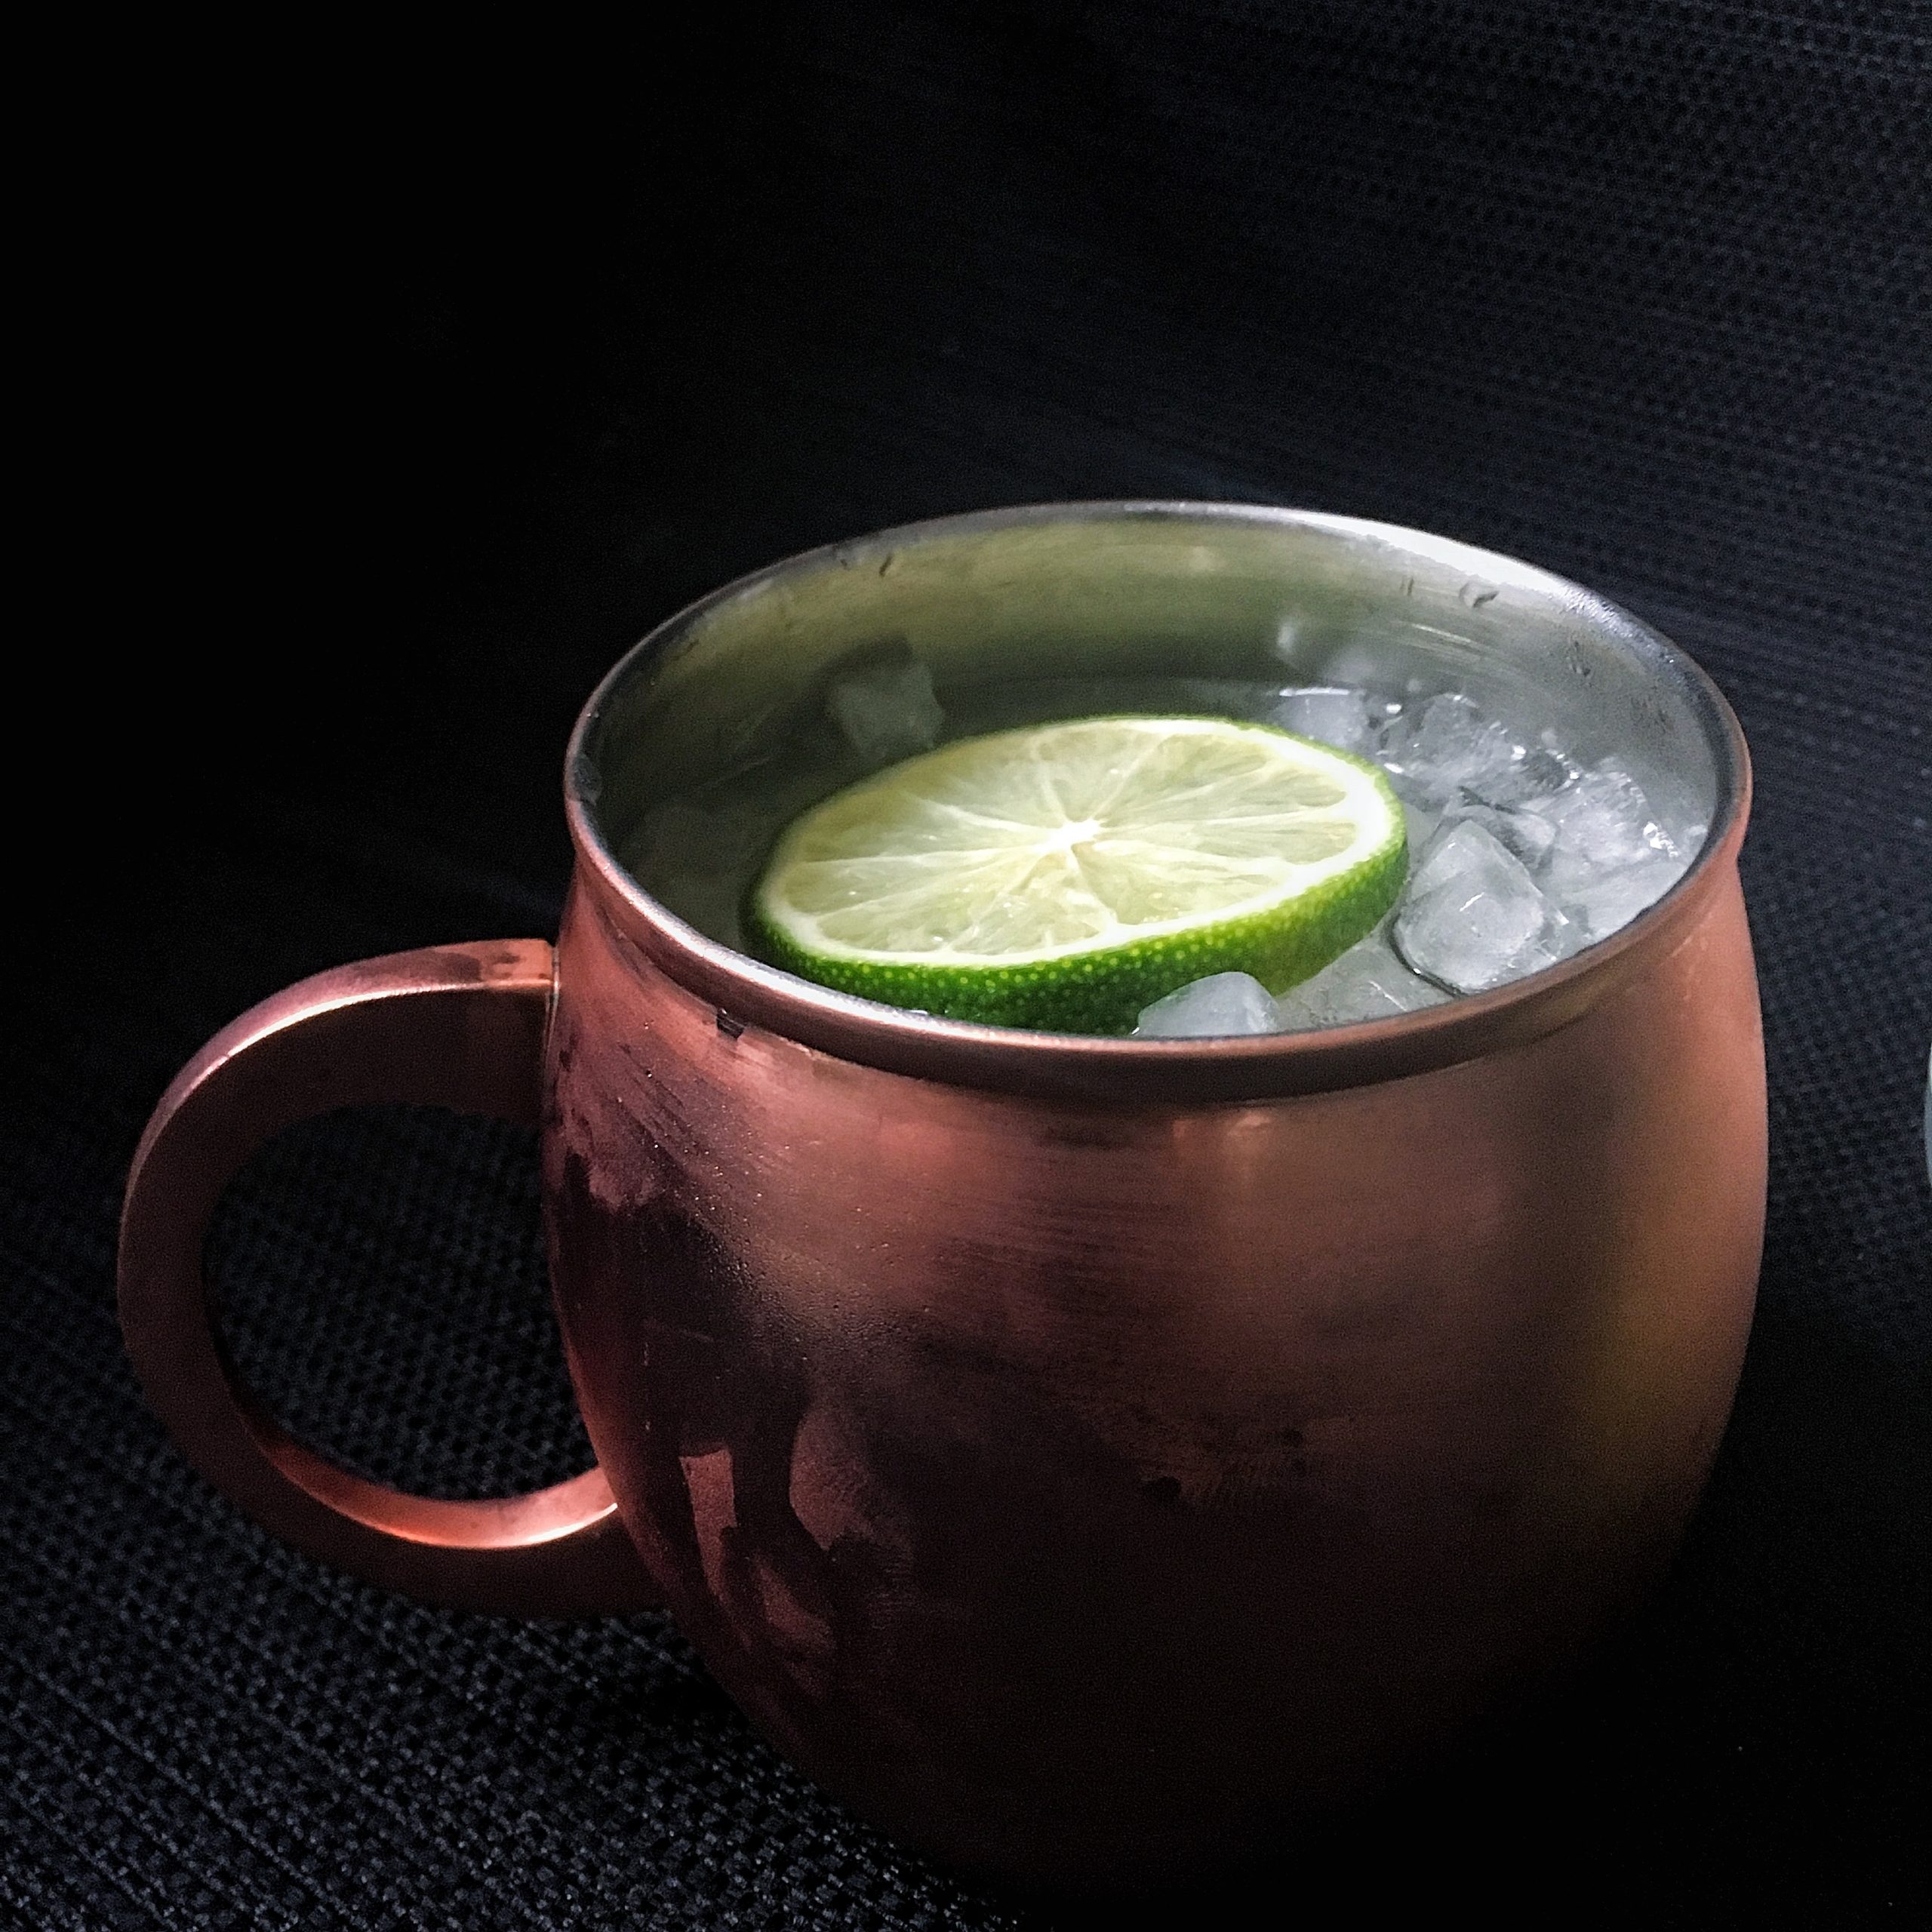 Moscow mule drink close up